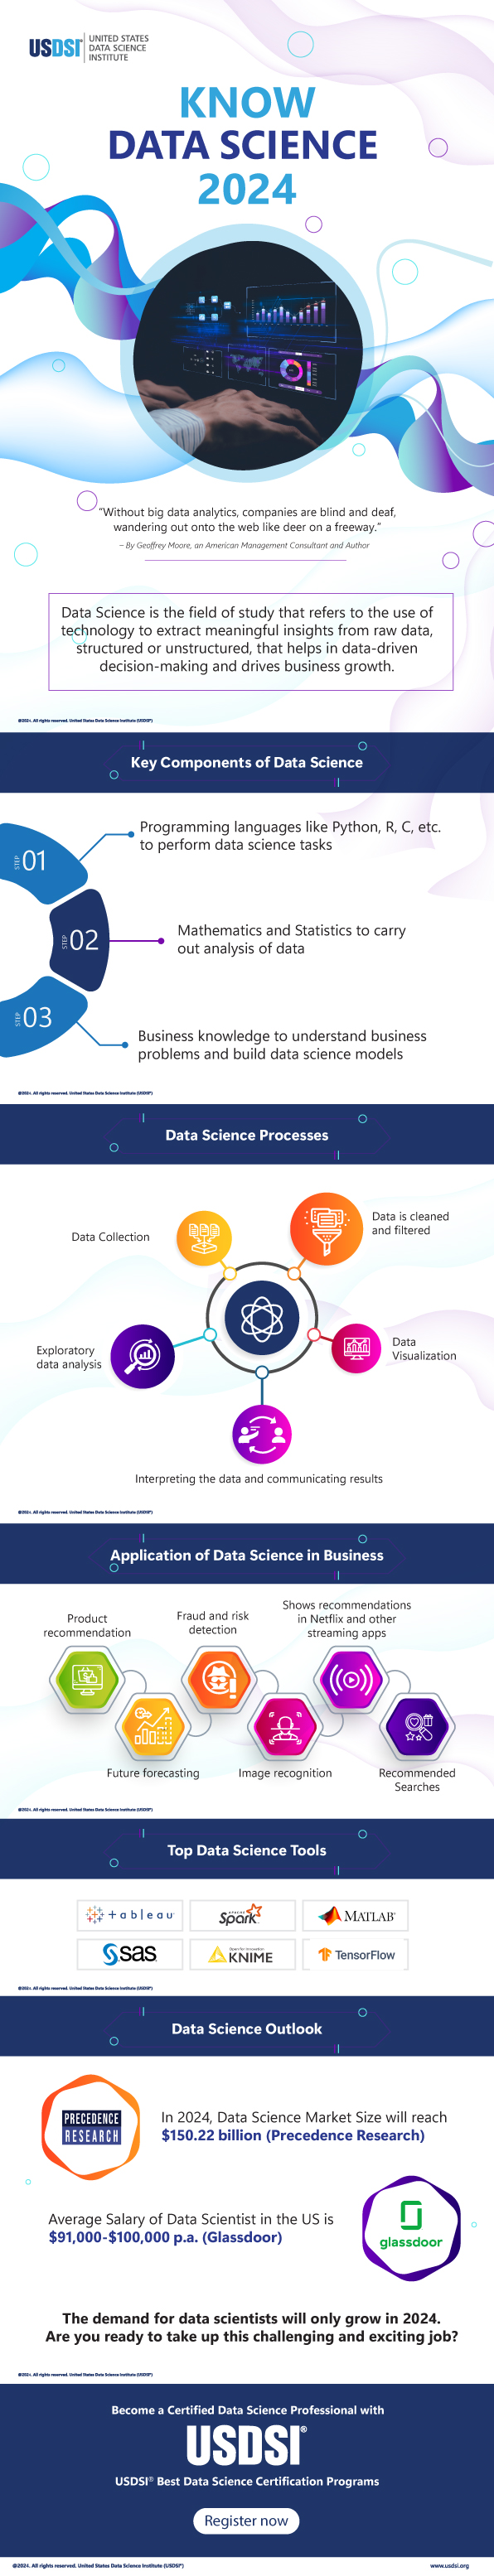 Know Data Science in 2024